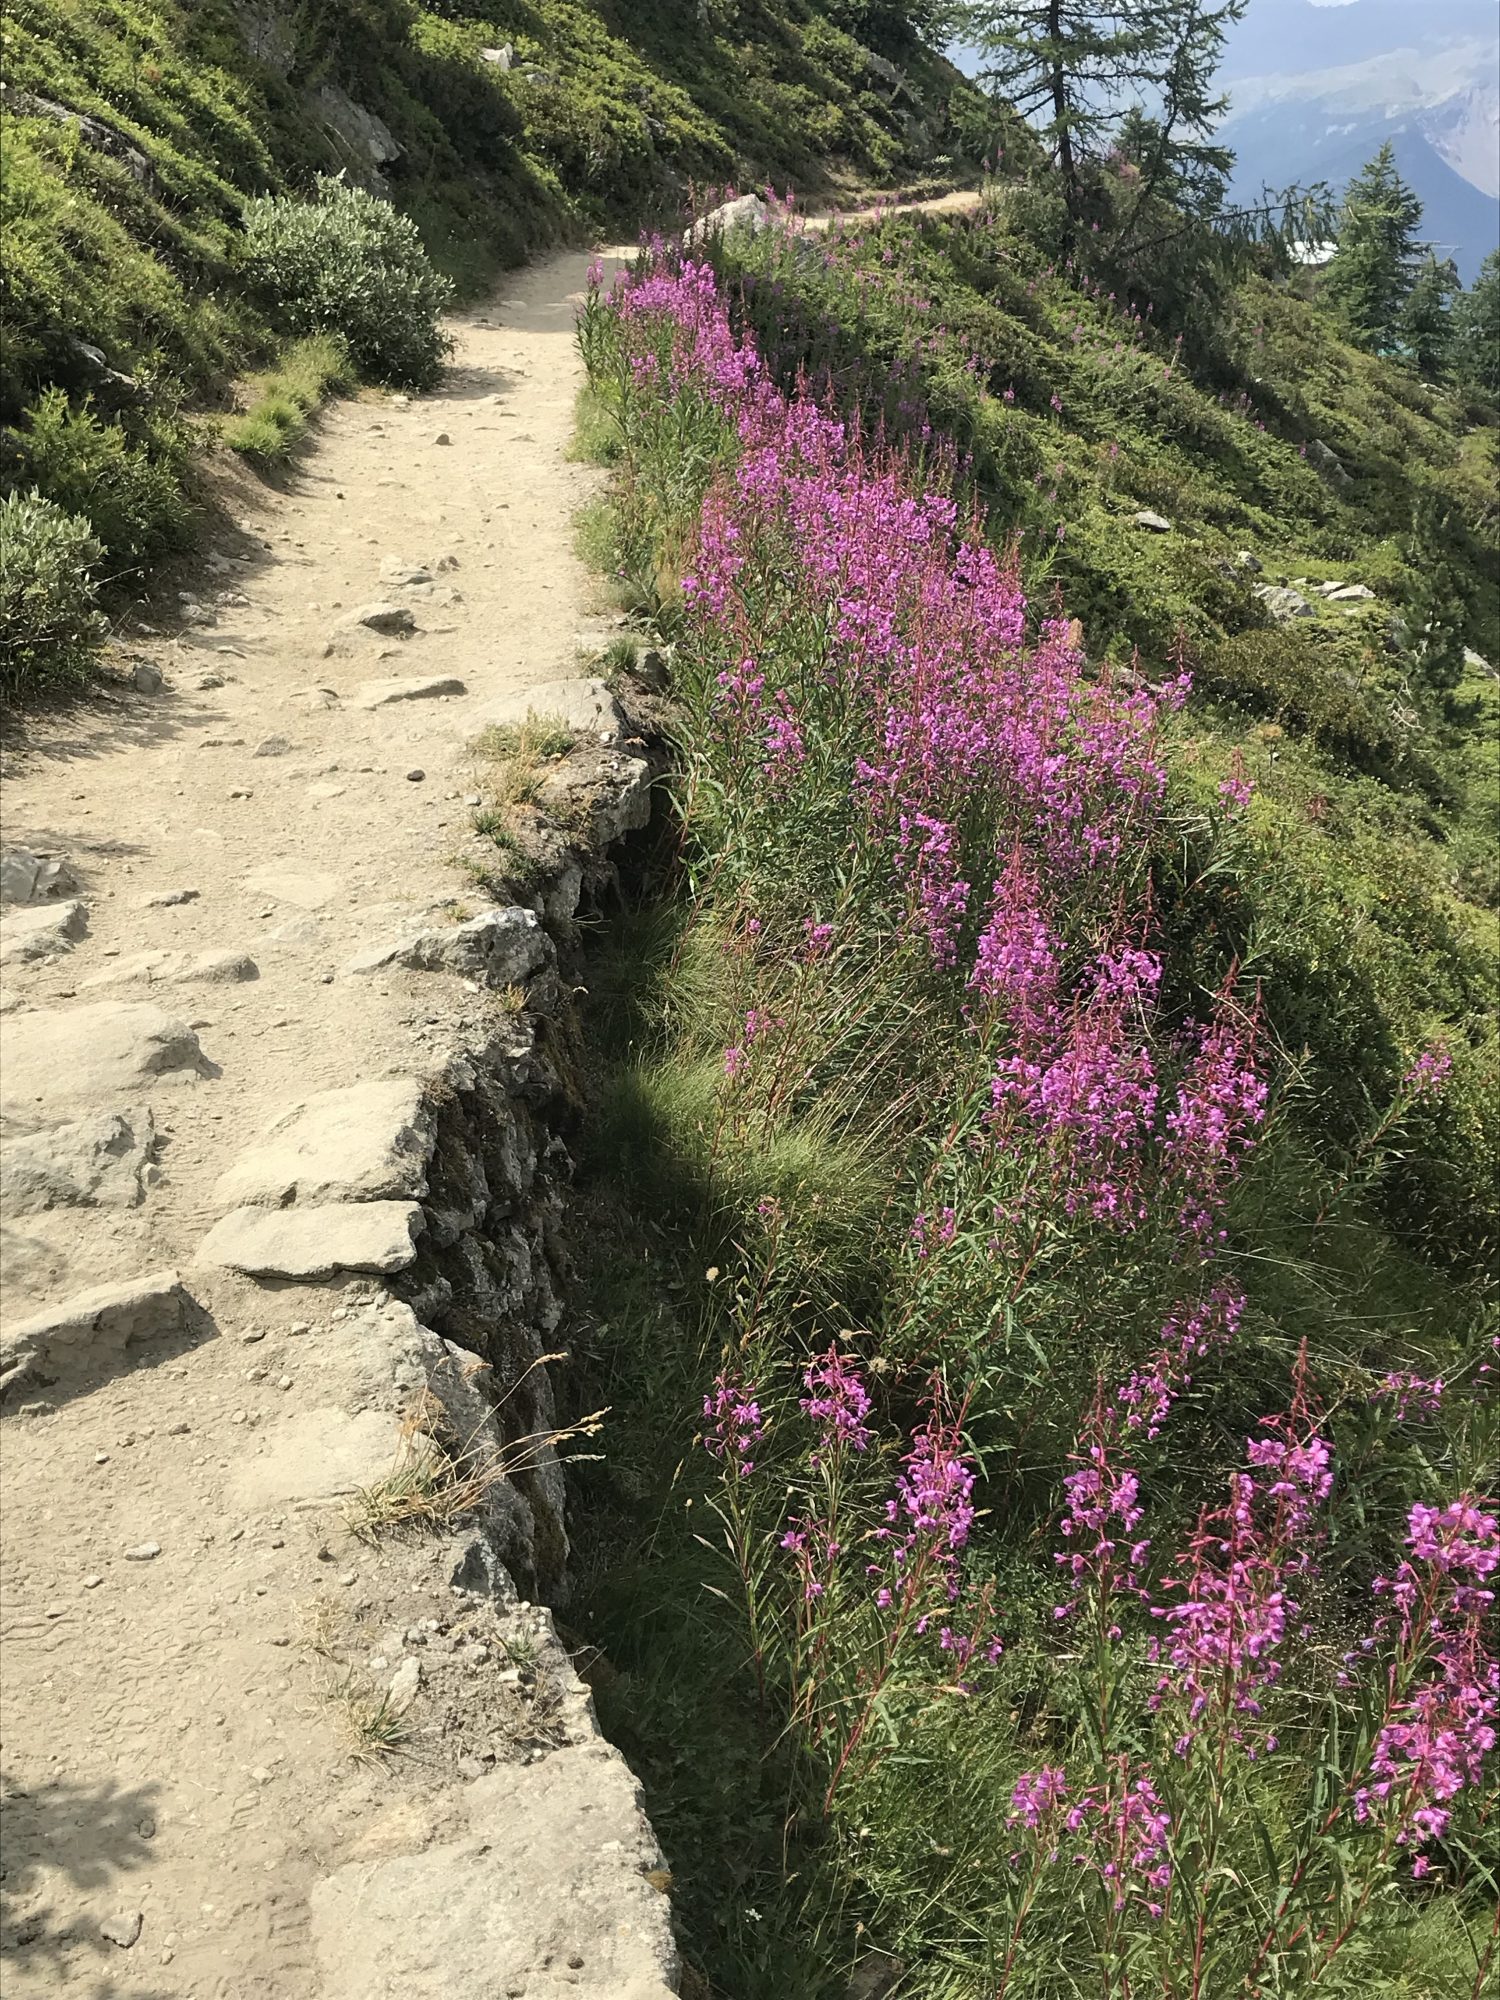 Wildflowers on the pathway - Our family hike in Pila during the past summer holiday.